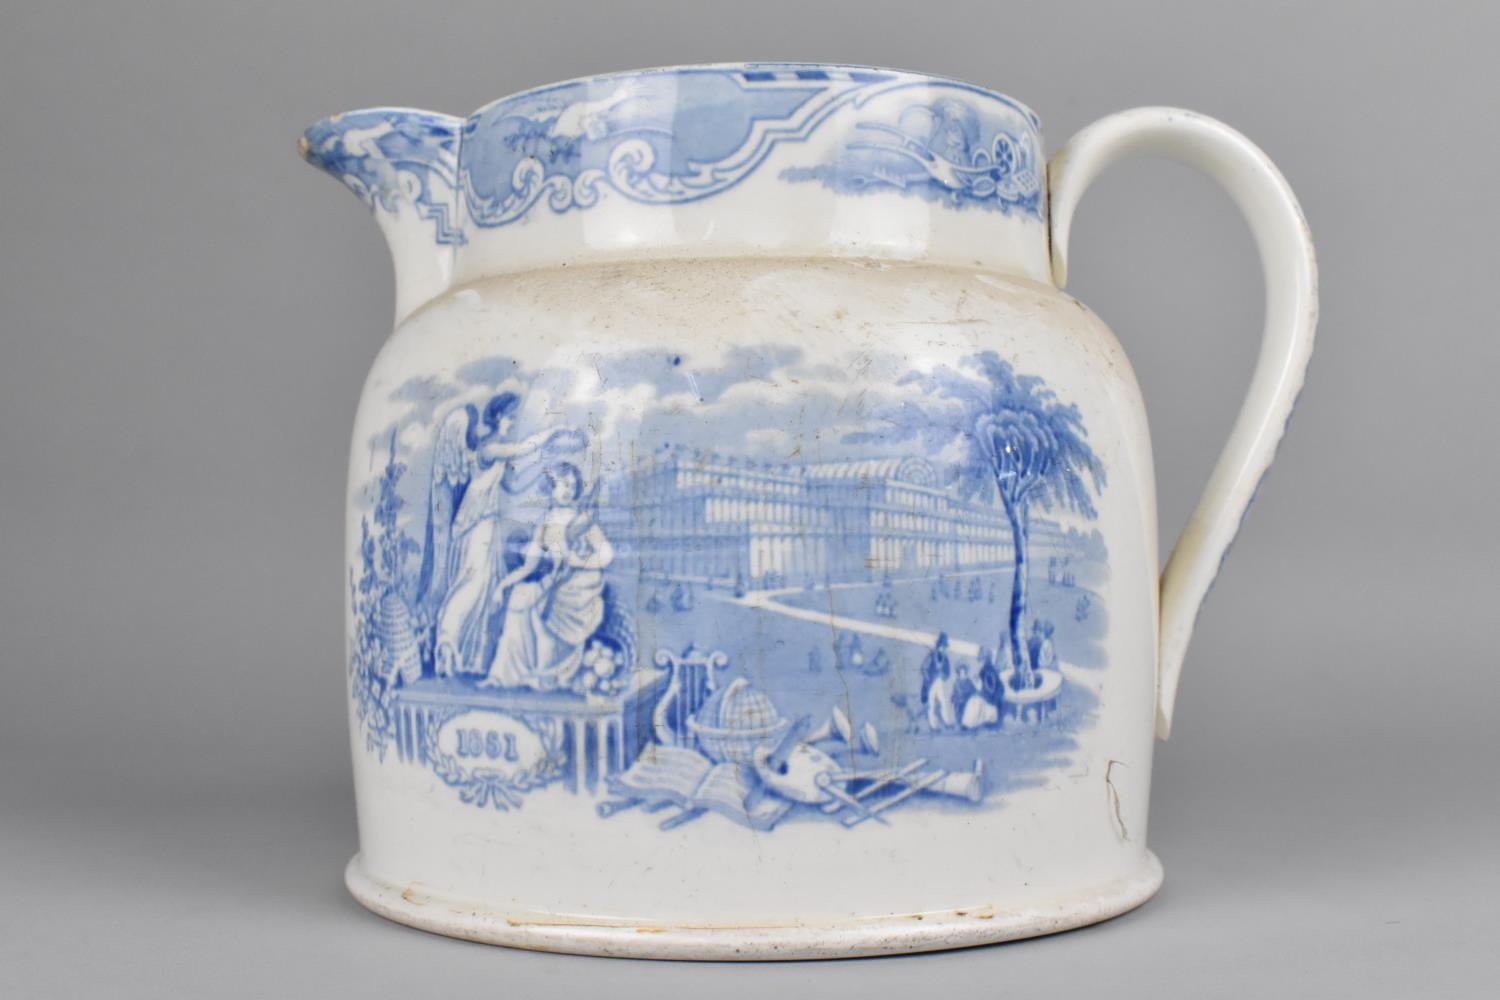 A Large Mid 19th Century English Blue and White Transfer Printed Jug with Crystal Palace Scene and - Image 2 of 2